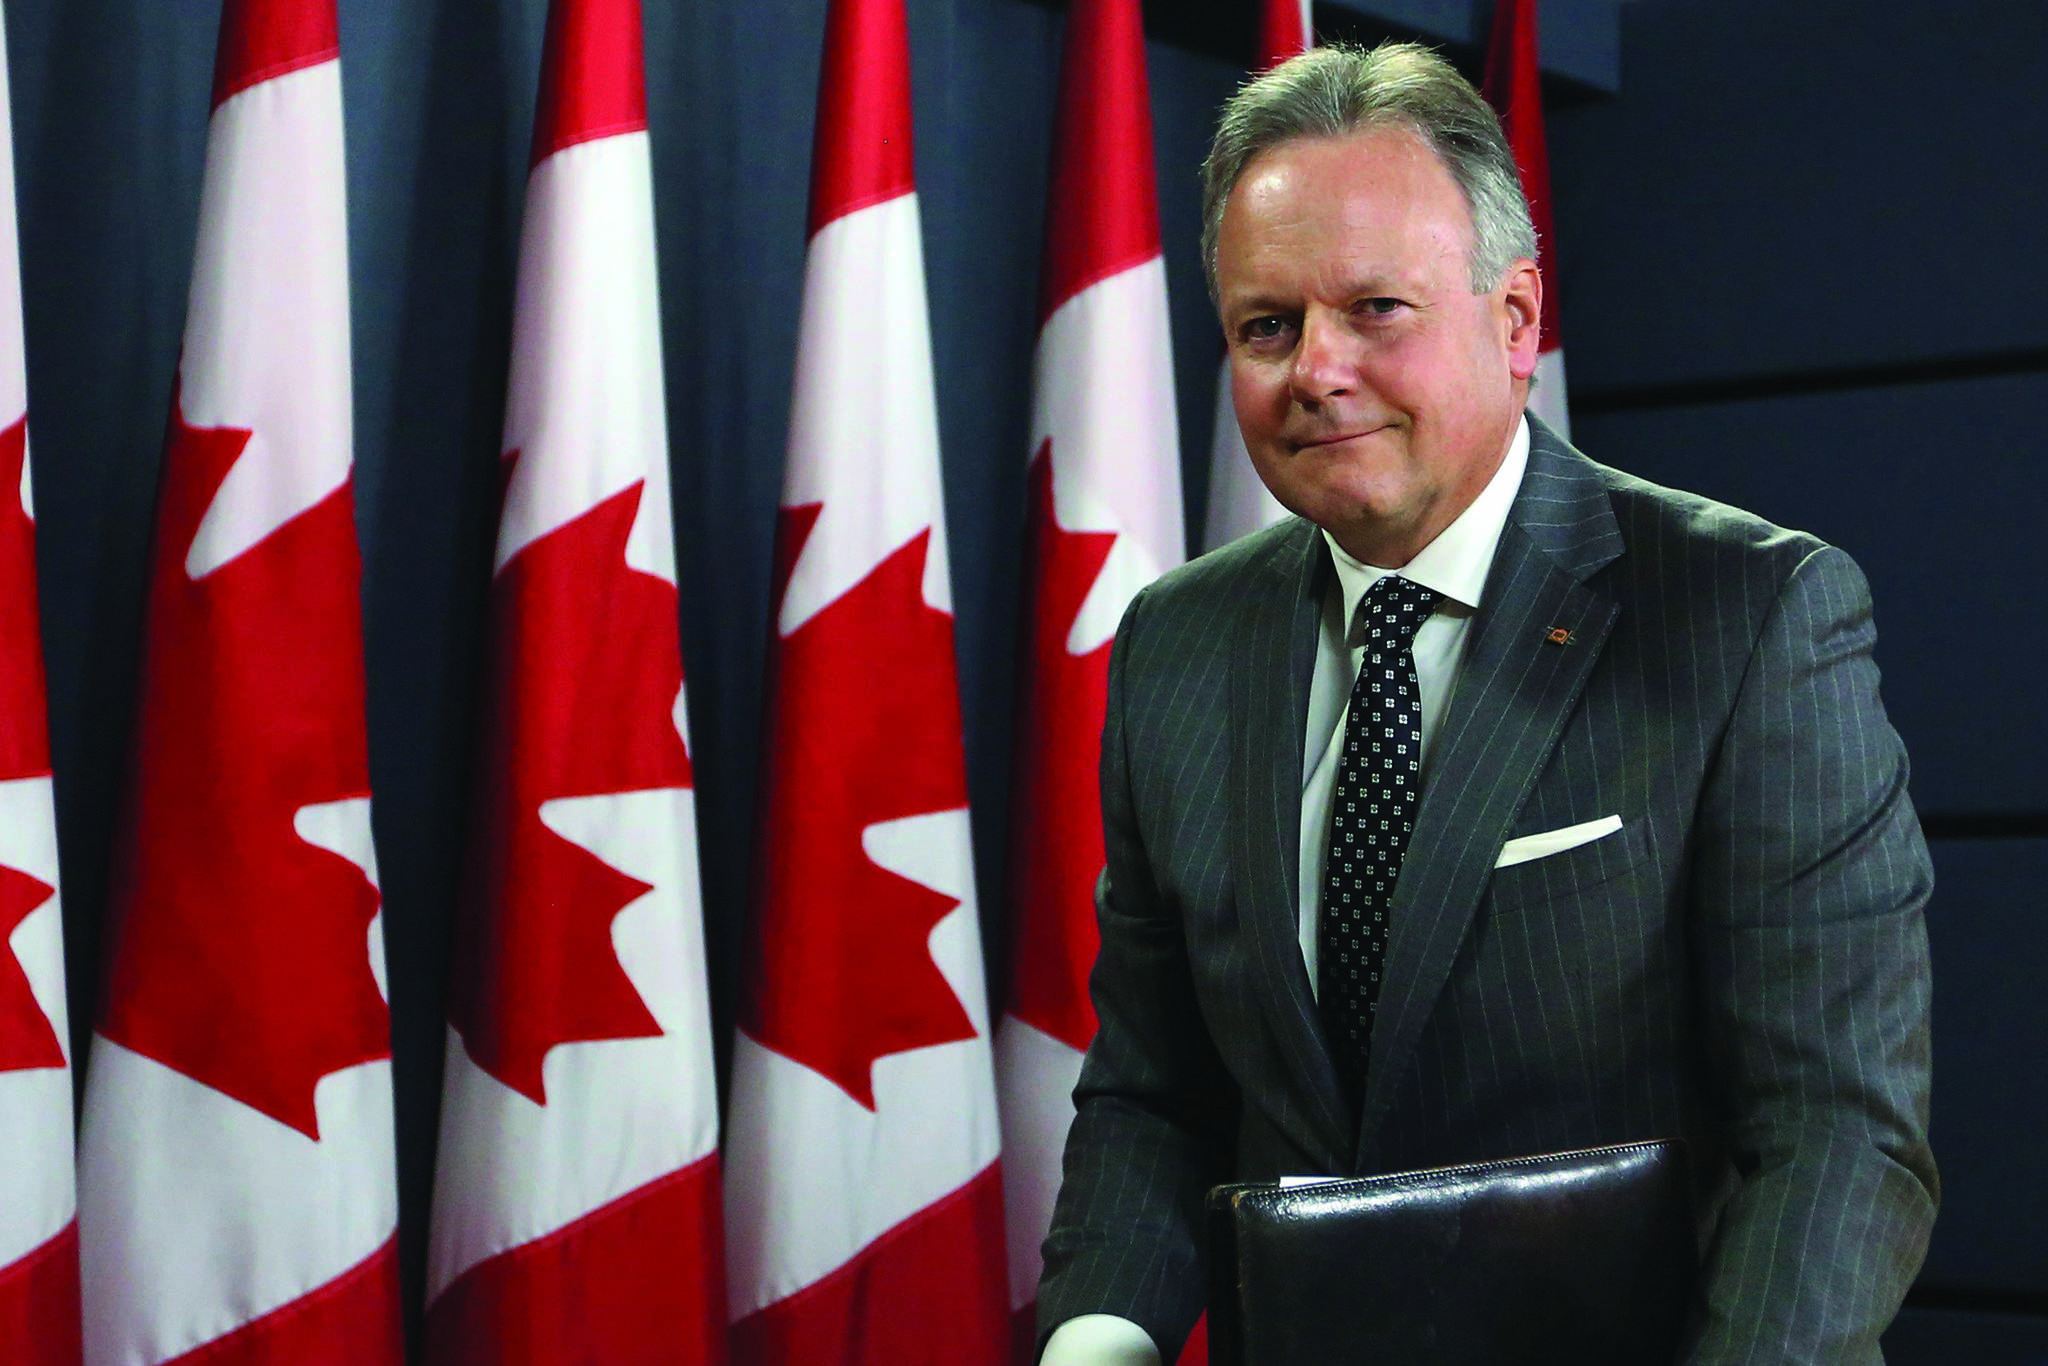 Stephen Poloz, Governor of the Bank of Canada concludes a news conference concerning the rise of the bank’s interest rates, in Ottawa, Tuesday July 12, 2017. (Fred Chartrand/The Canadian Press)